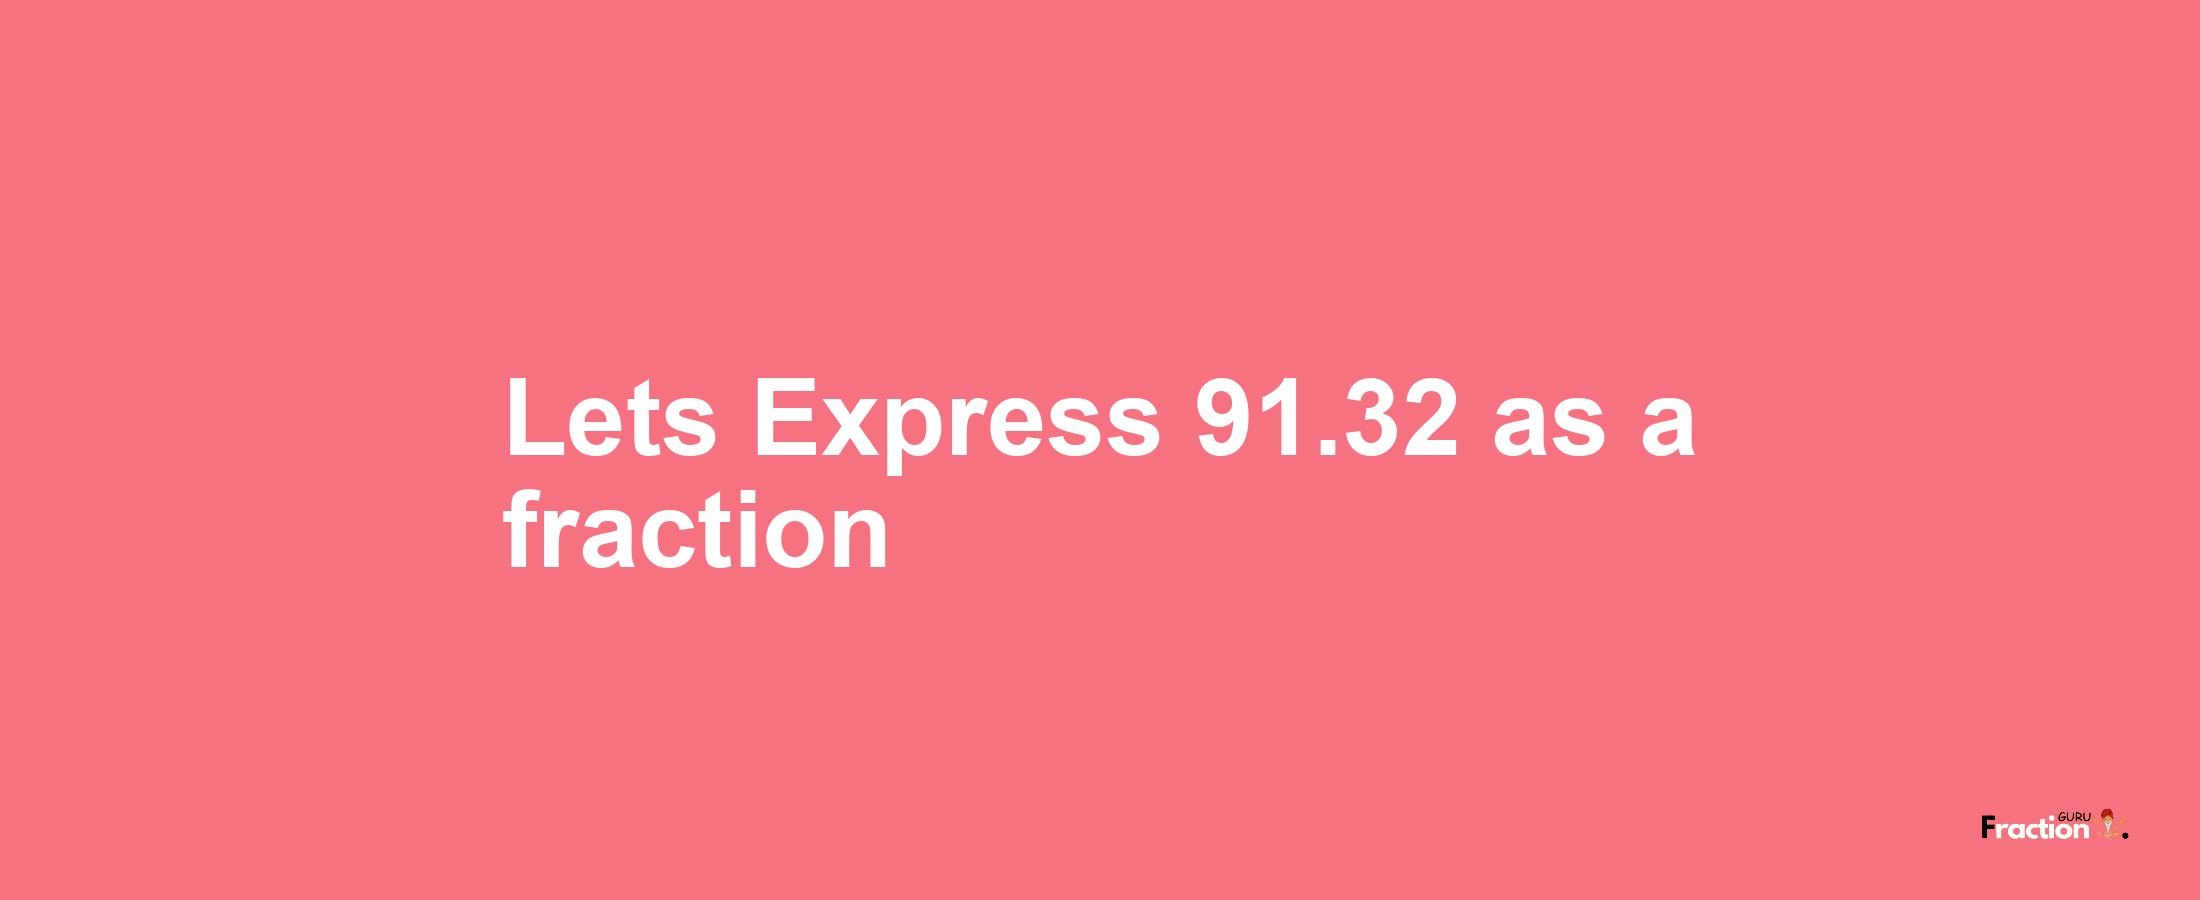 Lets Express 91.32 as afraction